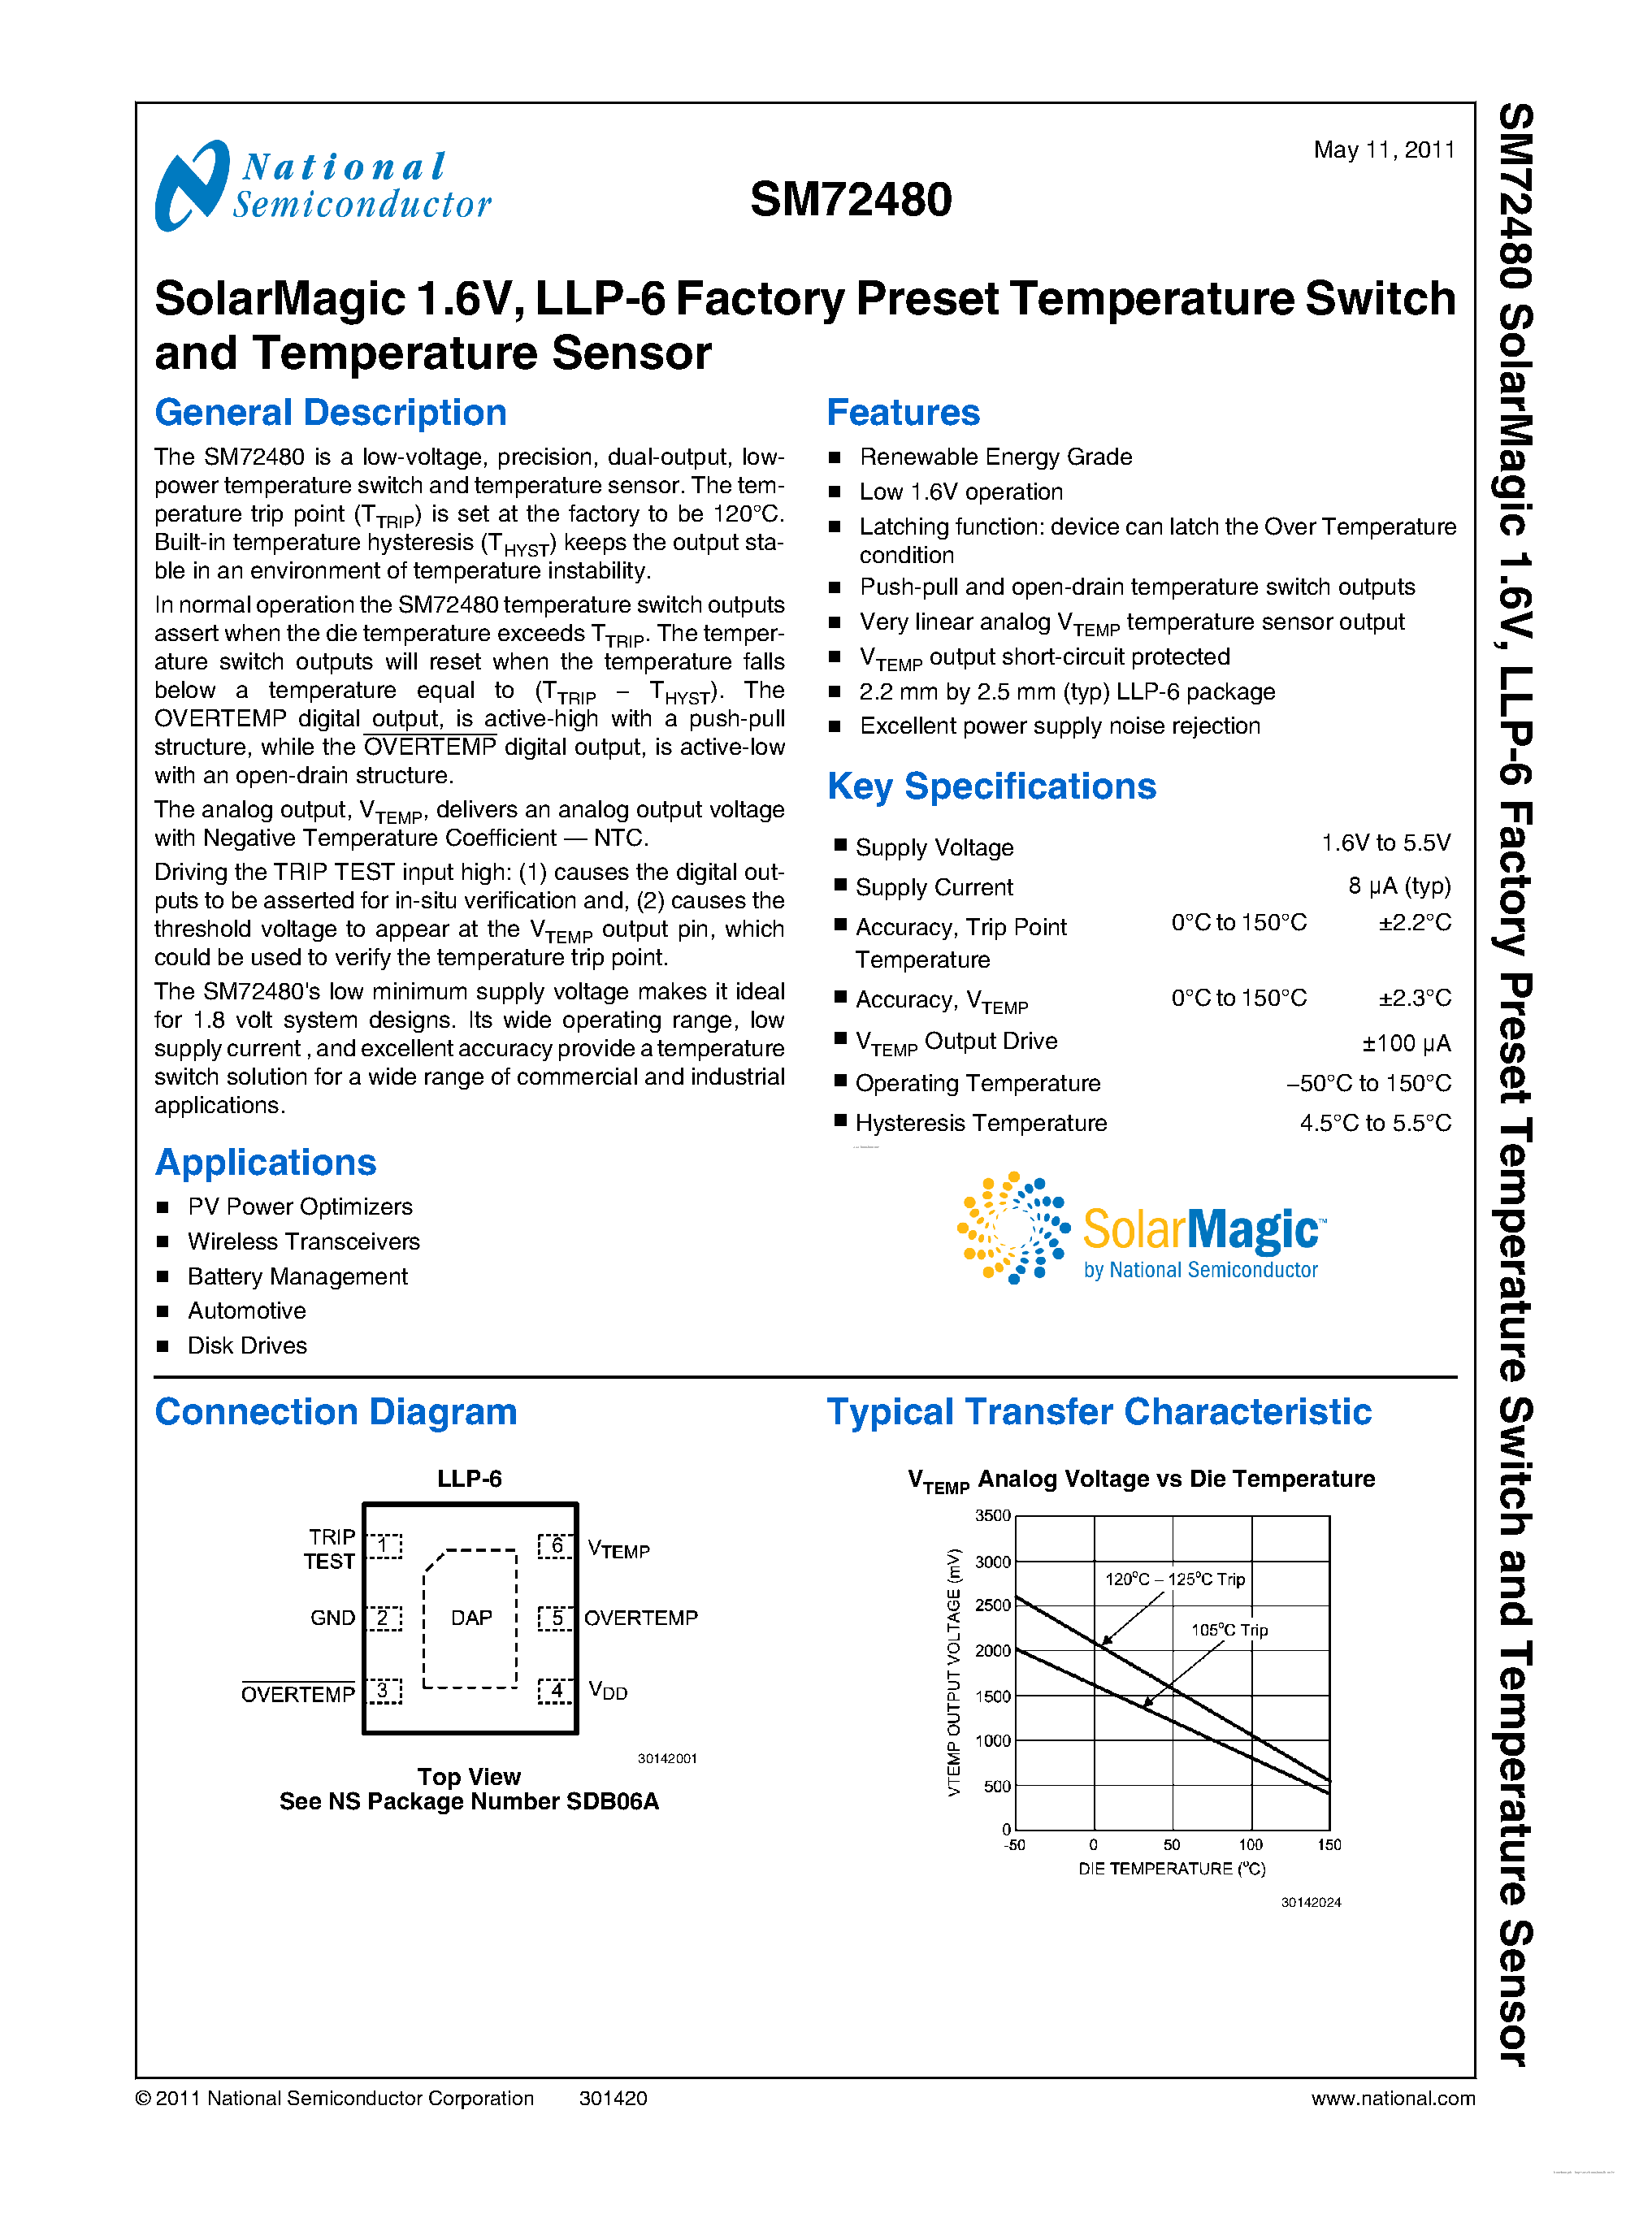 Datasheet SM72480 - LLP-6 Factory Preset Temperature Switch and Temperature Sensor page 1